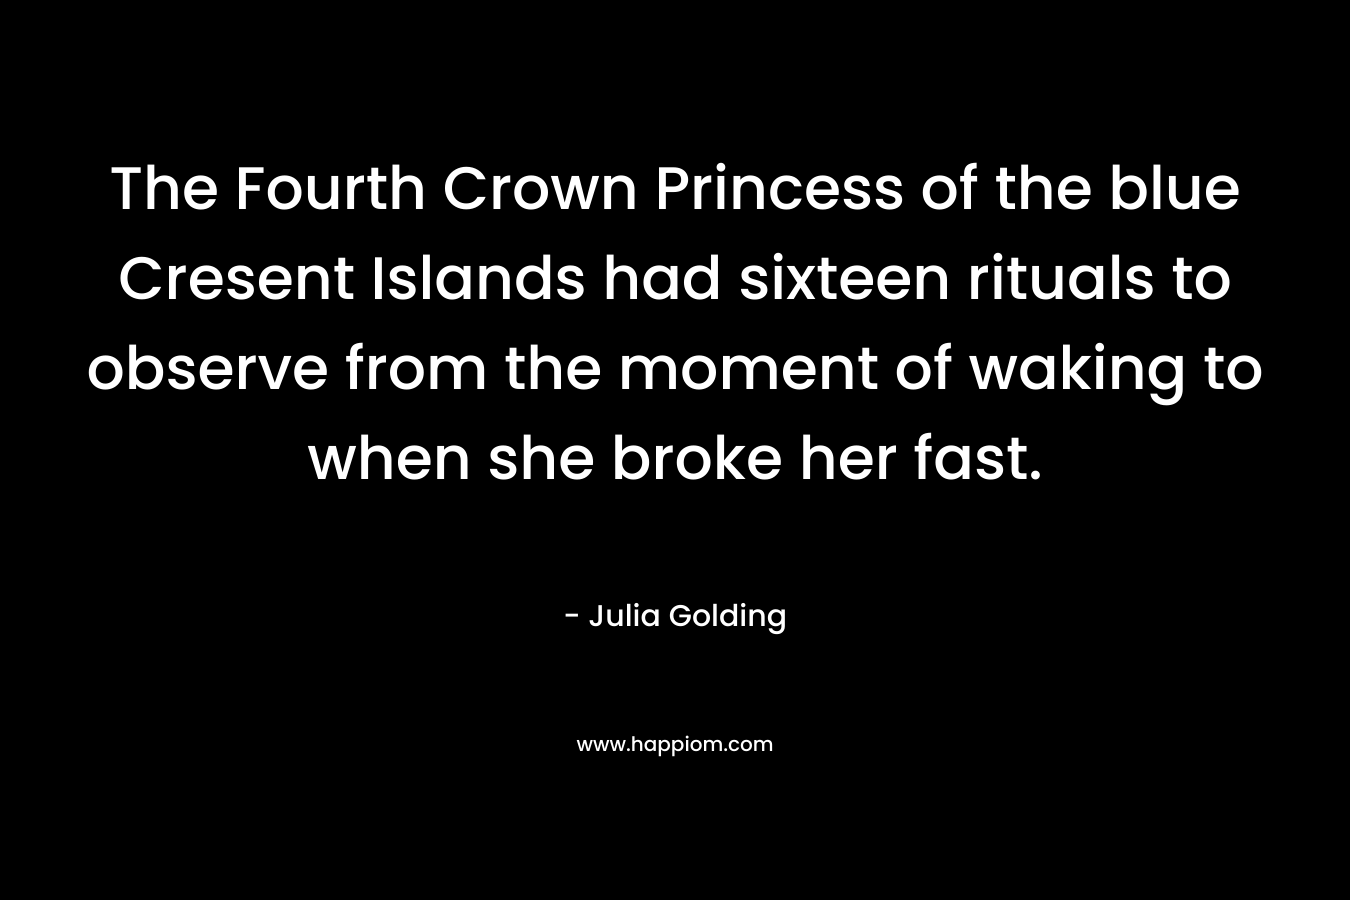 The Fourth Crown Princess of the blue Cresent Islands had sixteen rituals to observe from the moment of waking to when she broke her fast. – Julia Golding